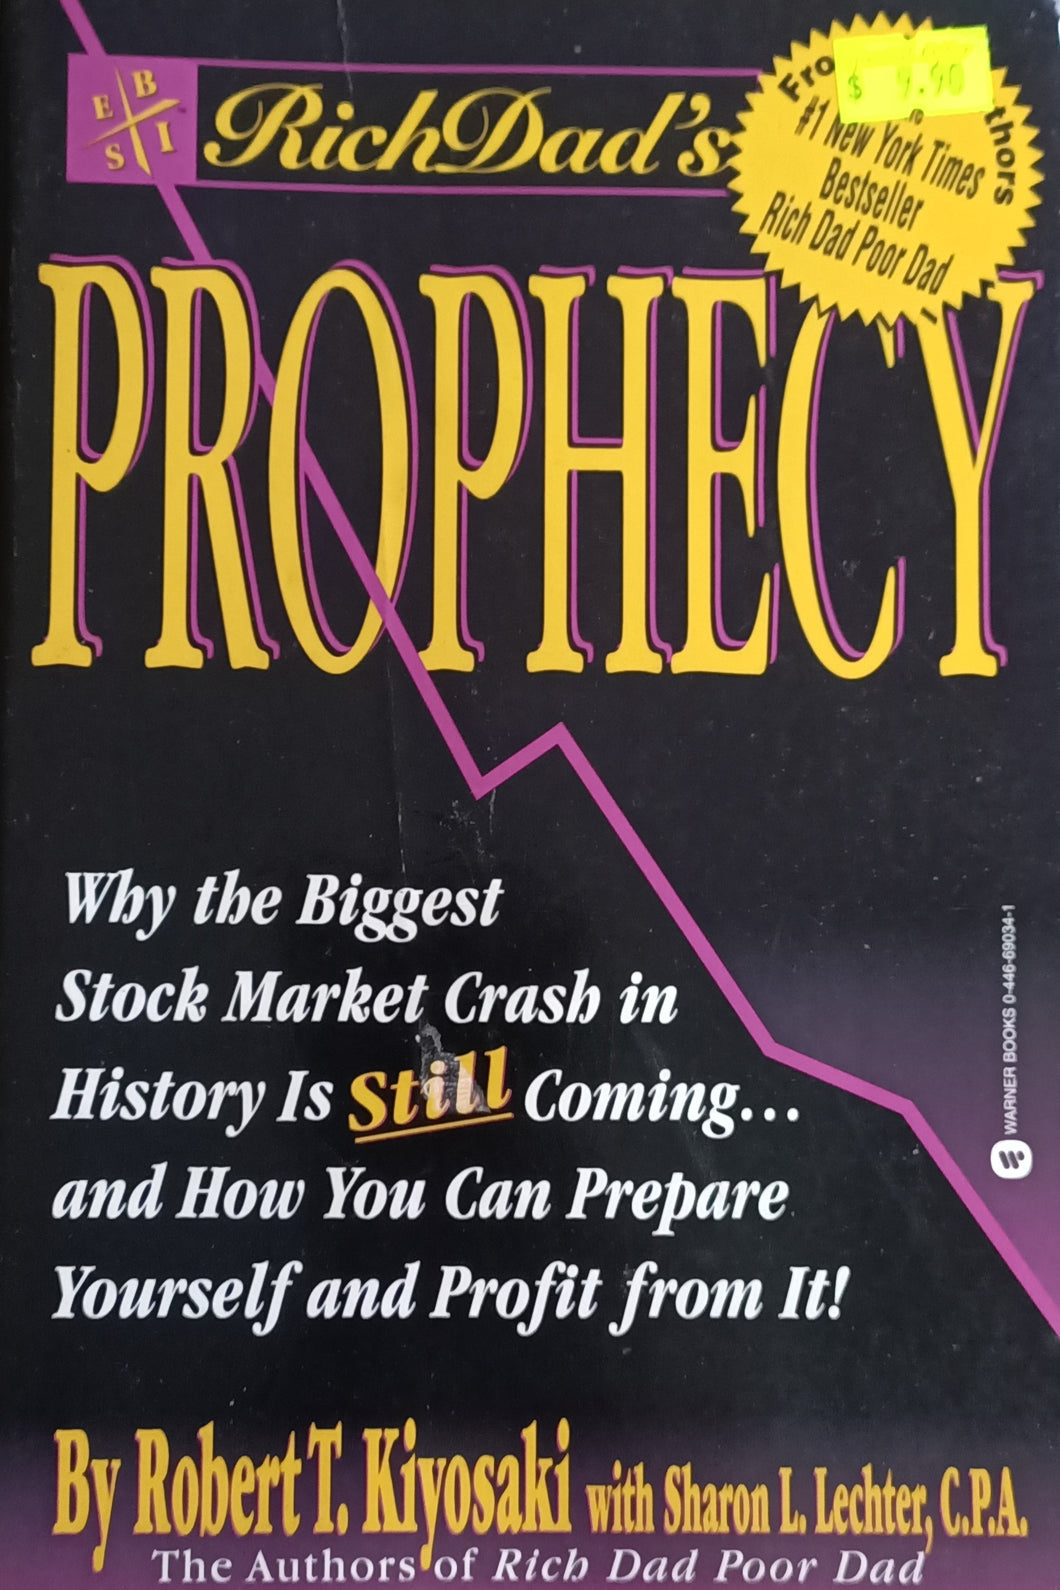 Rich Dad's: Prophecy - Robert T. Kiyosaki with Sharon L. Lector, C.P.A